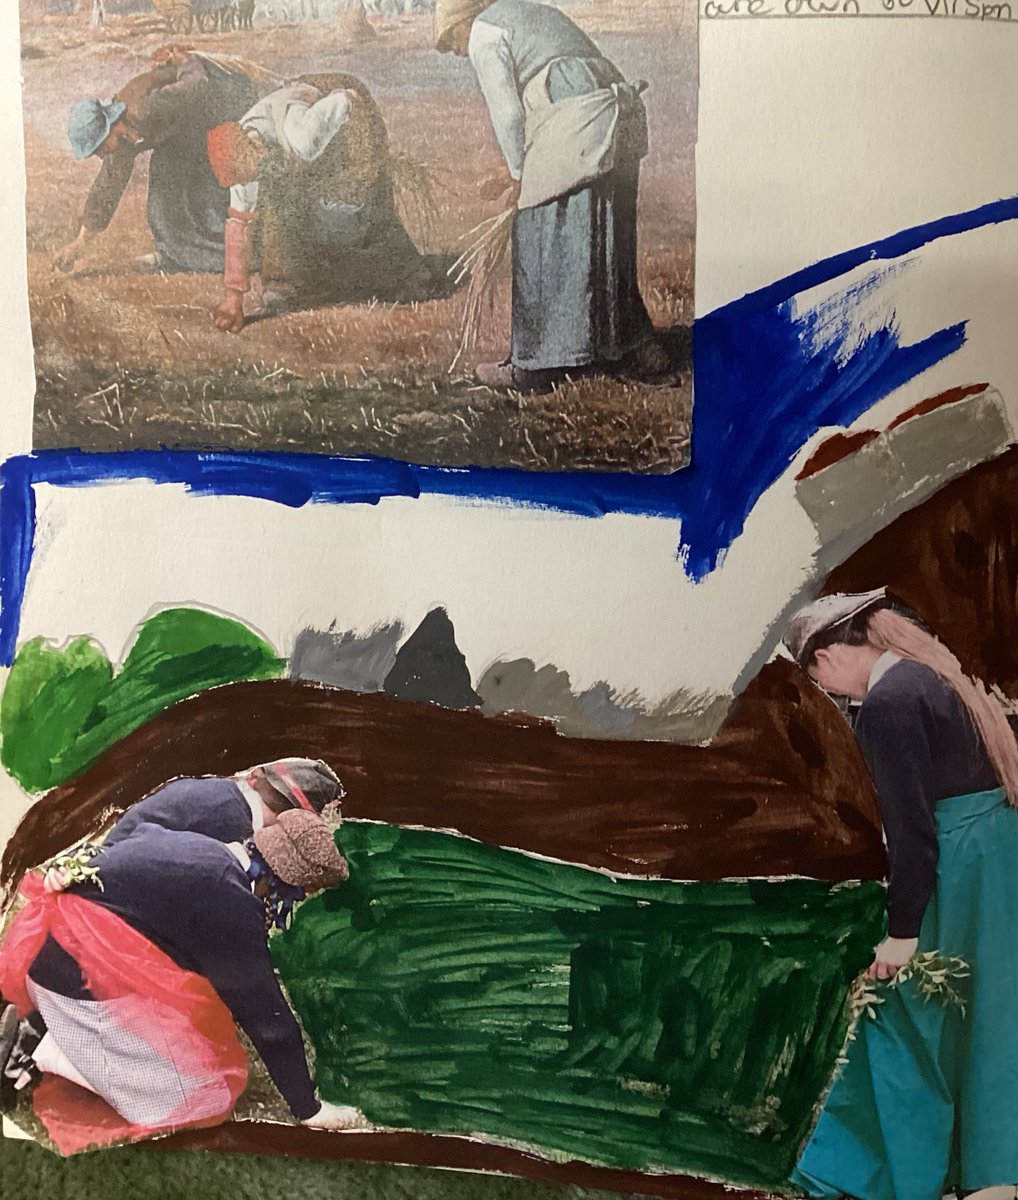 After recreating famous paintings through drama, Year 6 have used their artistic skills to make their own interpretation of the painting. Wow! #OLGHy6 #OLGHart @kapowprimary what do you think?